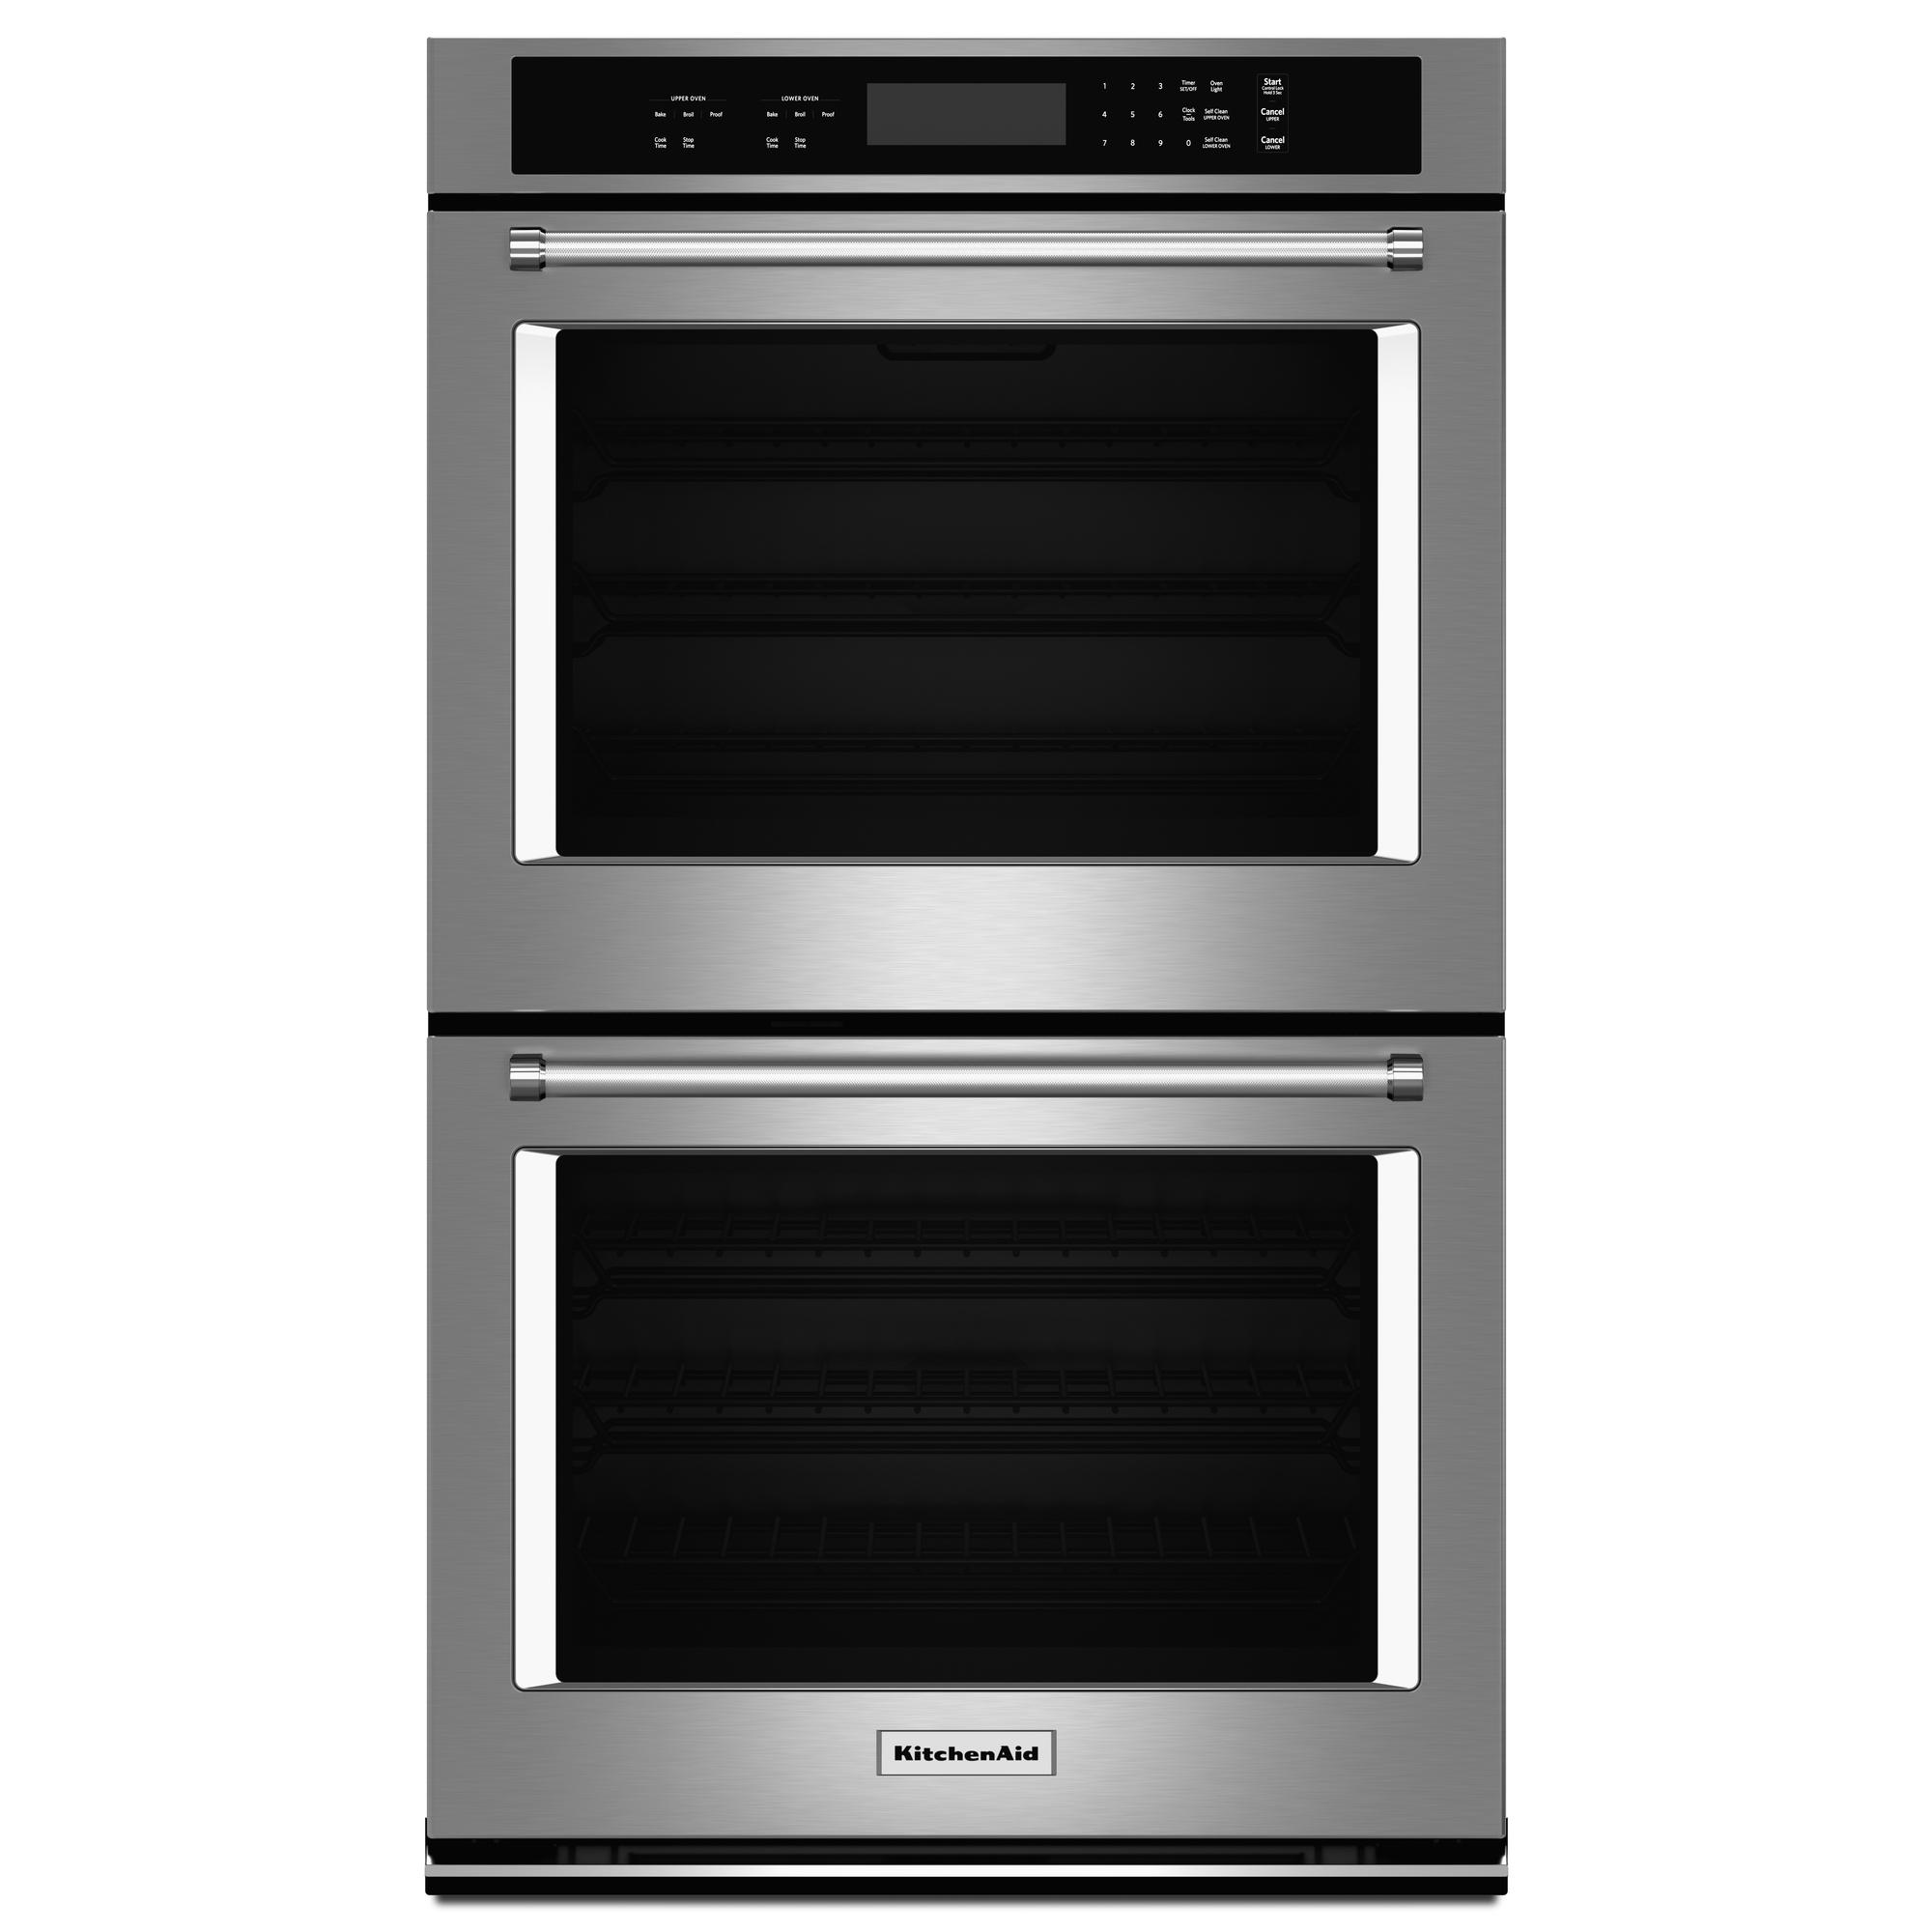 KitchenAid KODT100ESS 30" Double Wall Oven w/ Even-Heat™ Thermal Bake